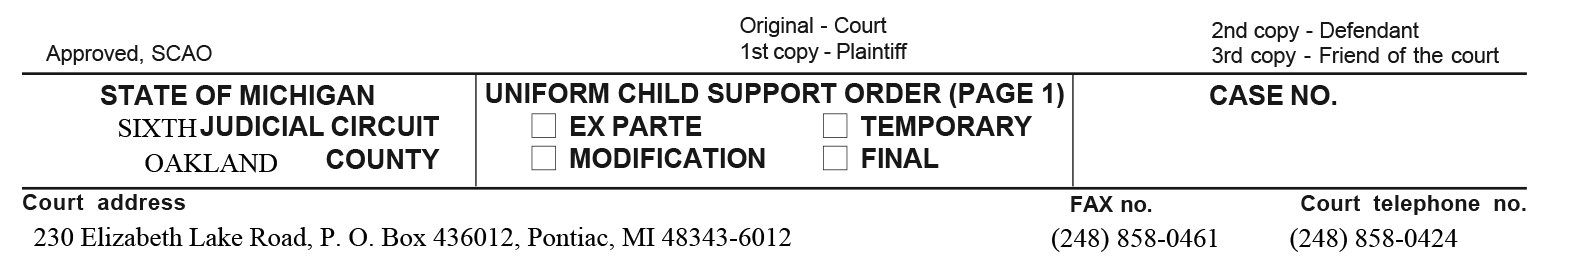 Blank example of a Michigan order to enforce child support. The document has information for the plaintiff and defendant to fill in